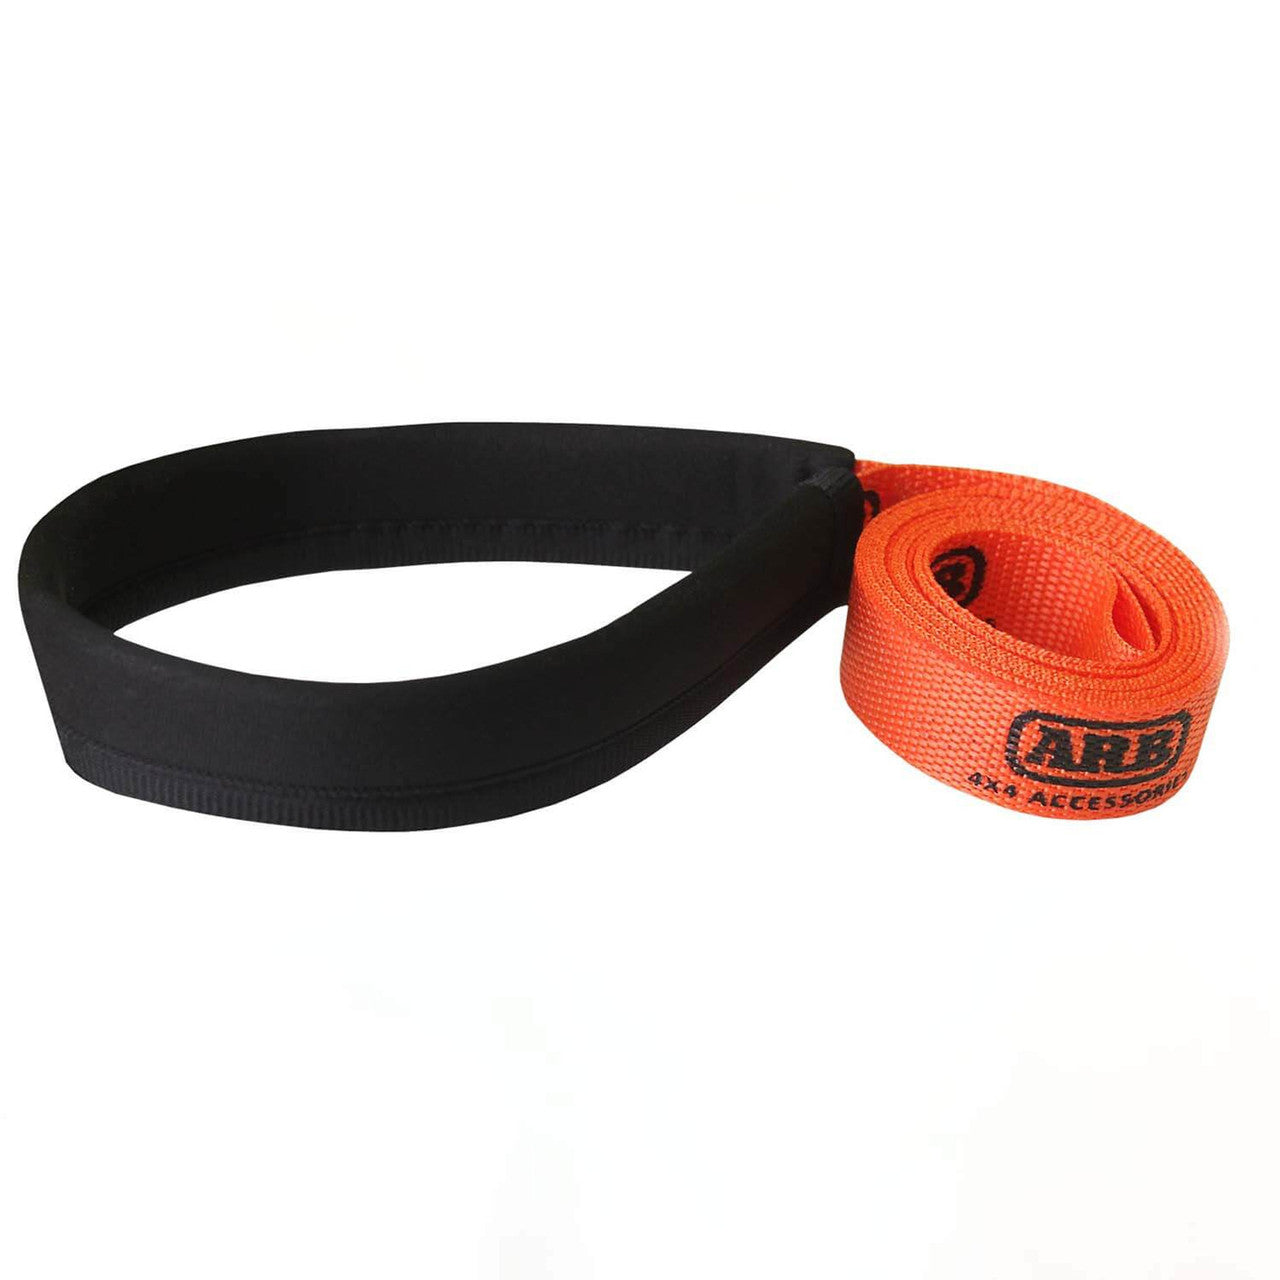 TRED Recovery Board Leash Pair TLOARB